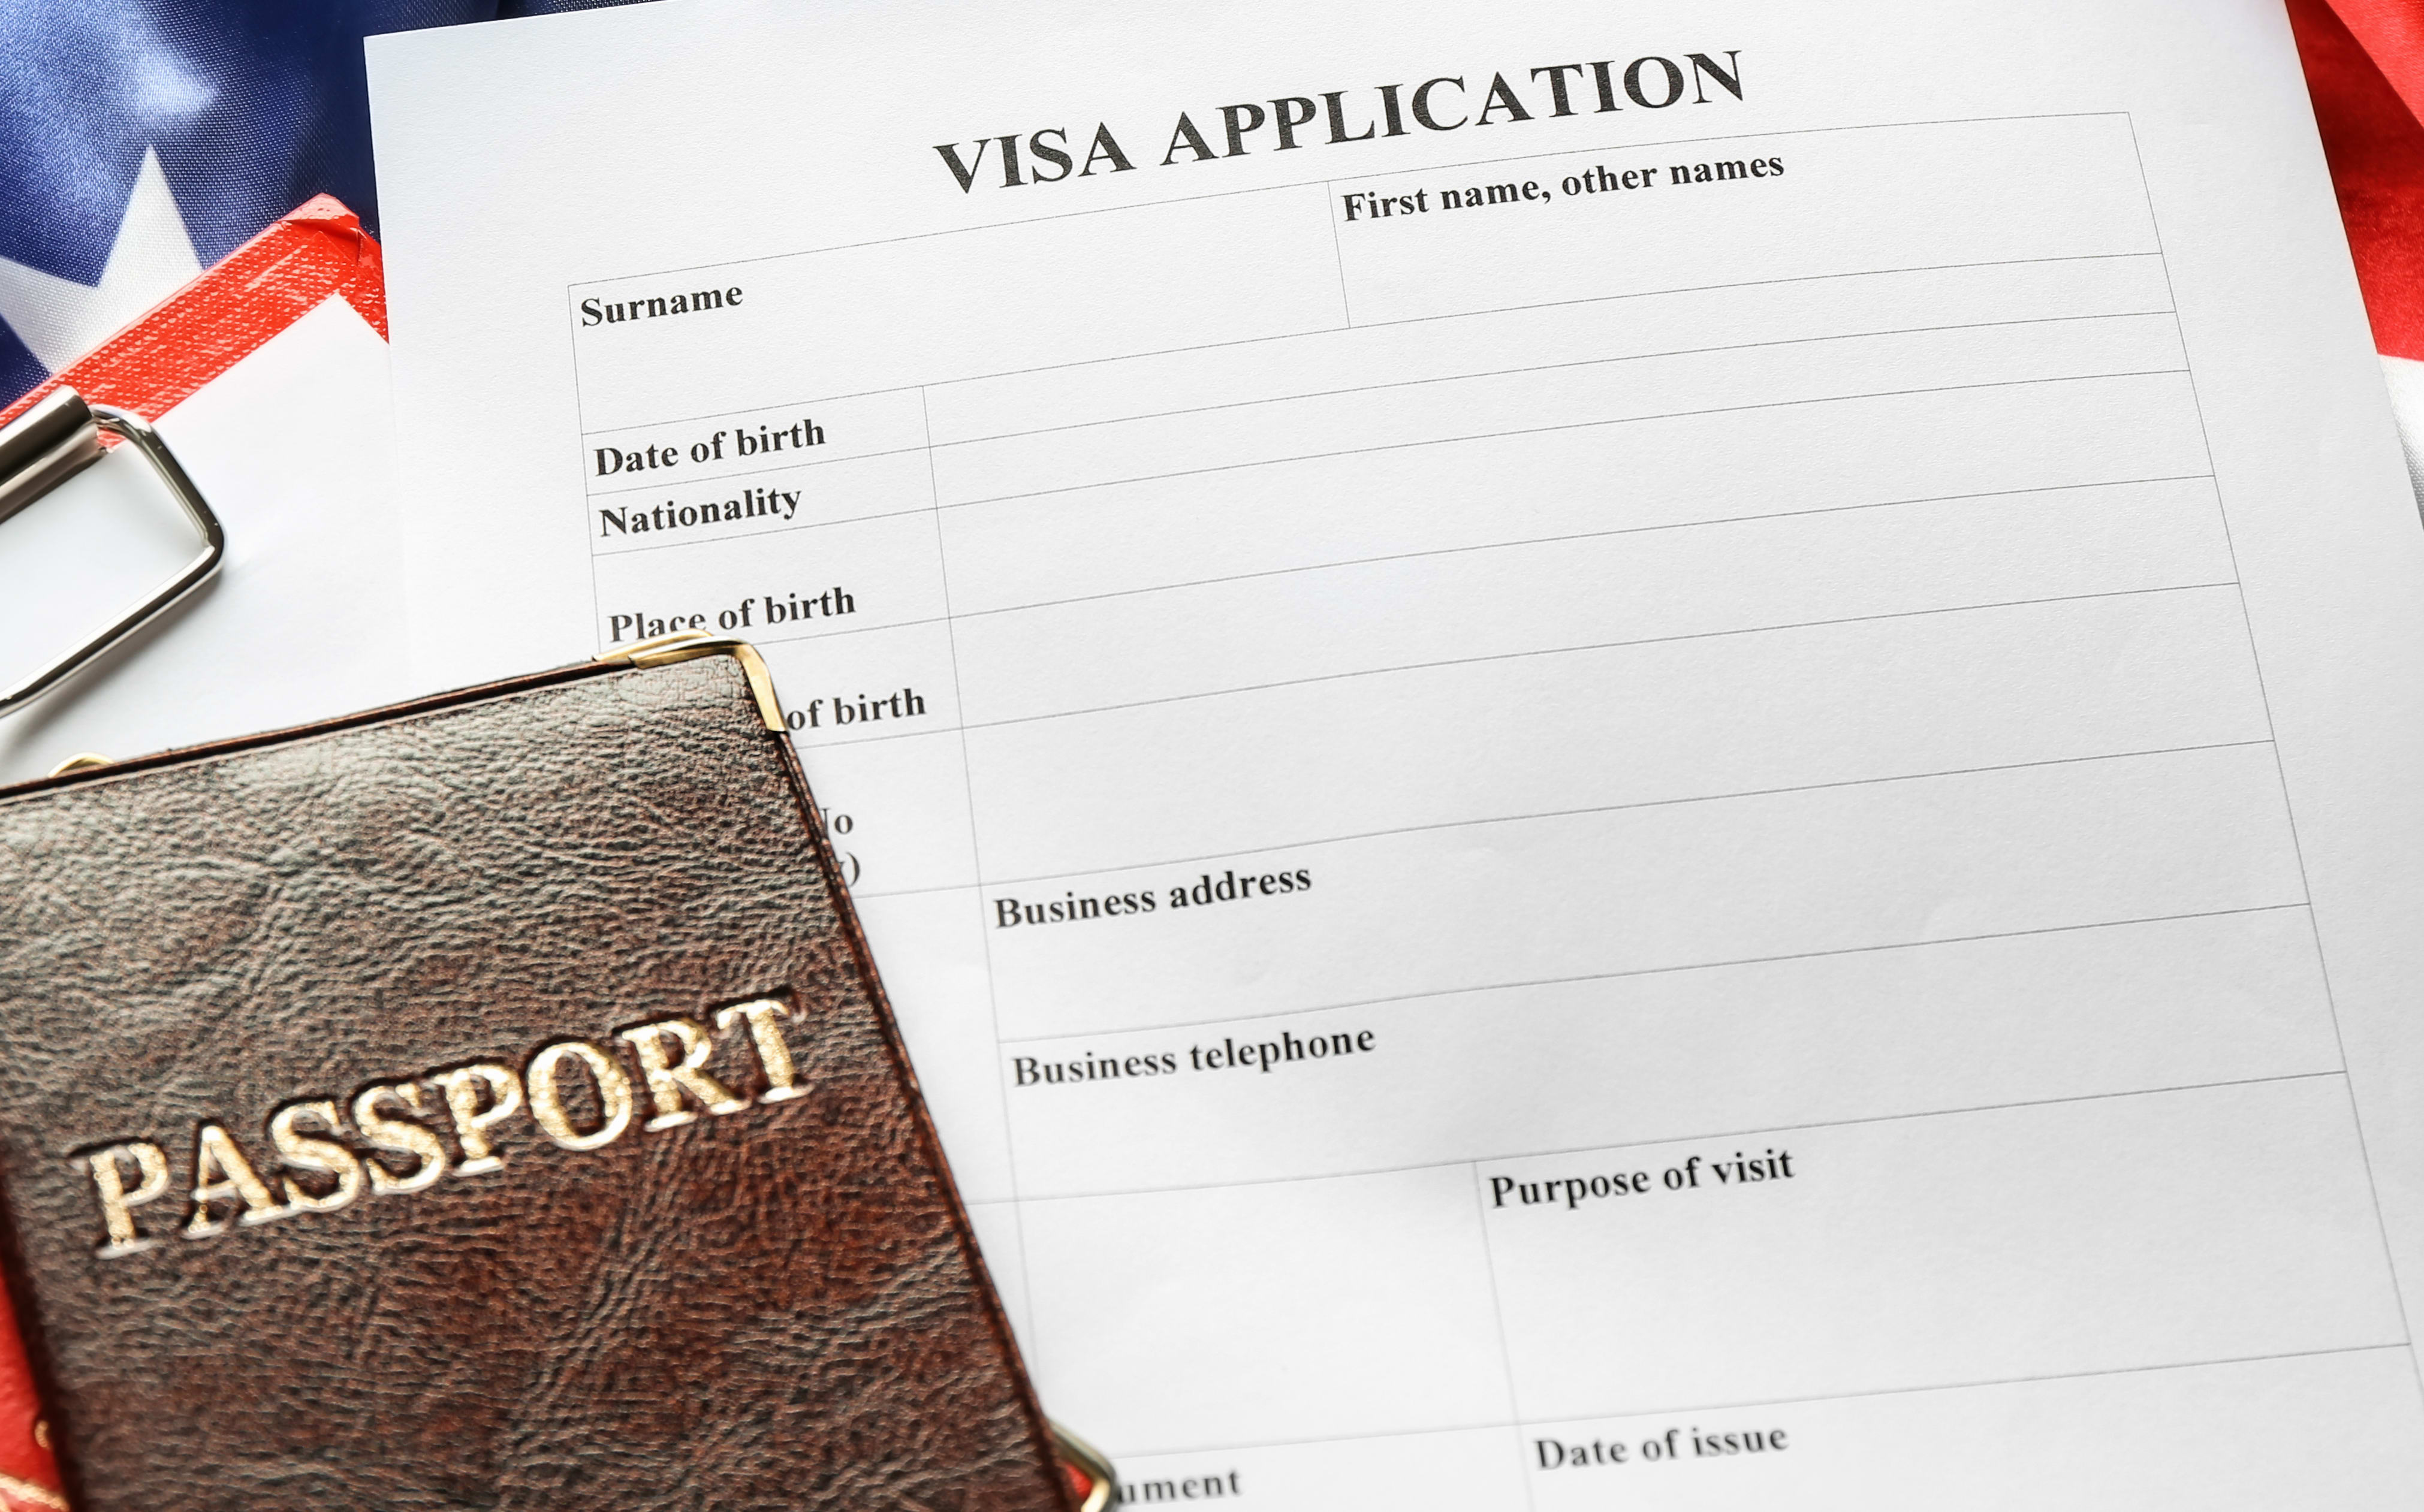 Passports, American flag and visa application form on table. Immigration to USA.